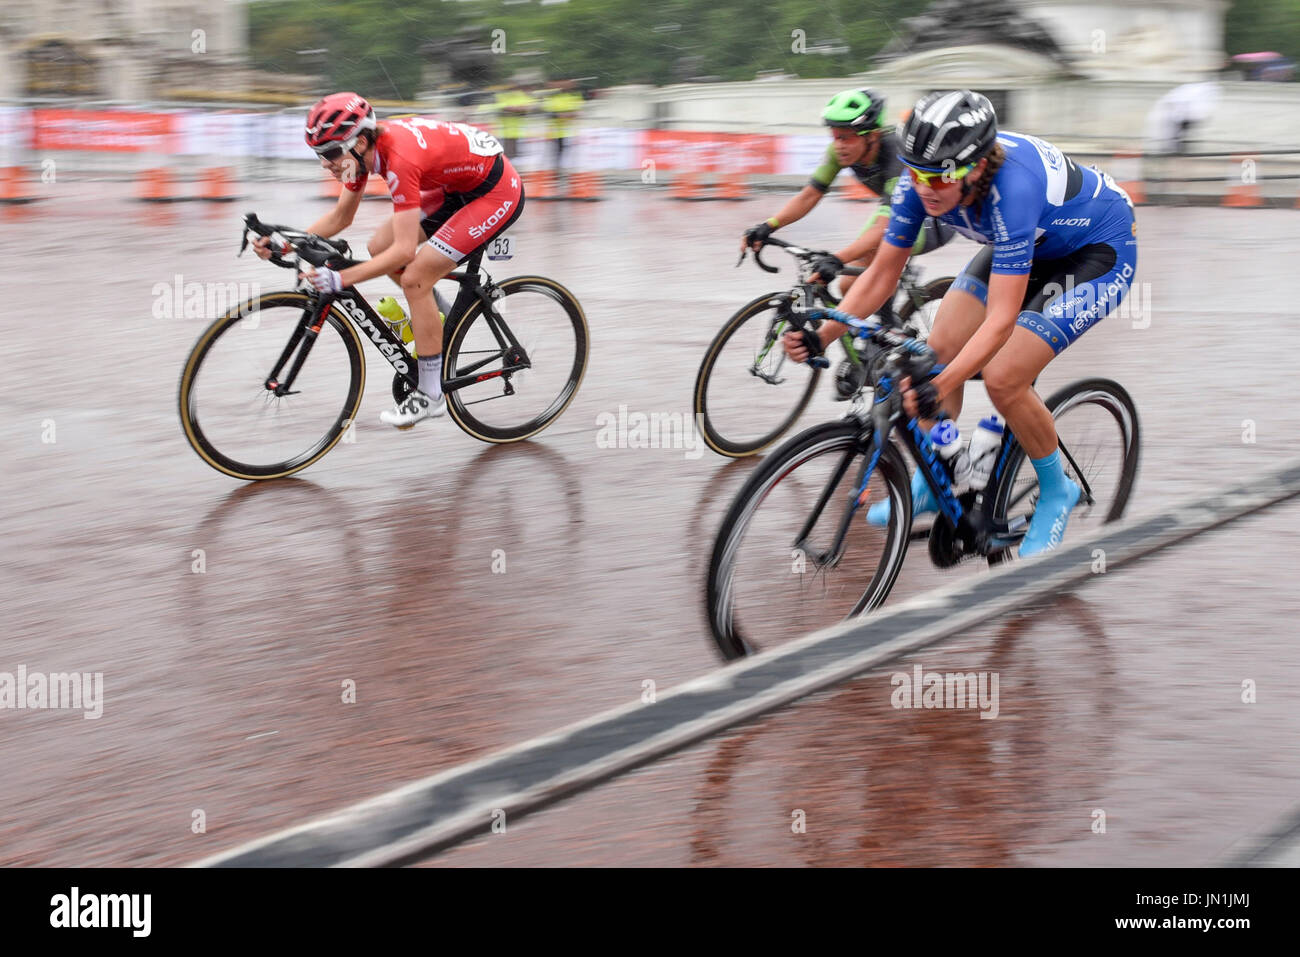 London, UK.  29 July 2017.  Elite women riders pass Buckingham Palace during the Prudential RideLondon Classique riding 12 laps round a 5.5km circuit in central London.  Ranked as one of the top women's UCI WorldTour events, prize money for the race is the highest ever for a women's one day race and features 18 of the top 20 teams from the Women's World Tour.  Credit: Stephen Chung / Alamy Live News Stock Photo